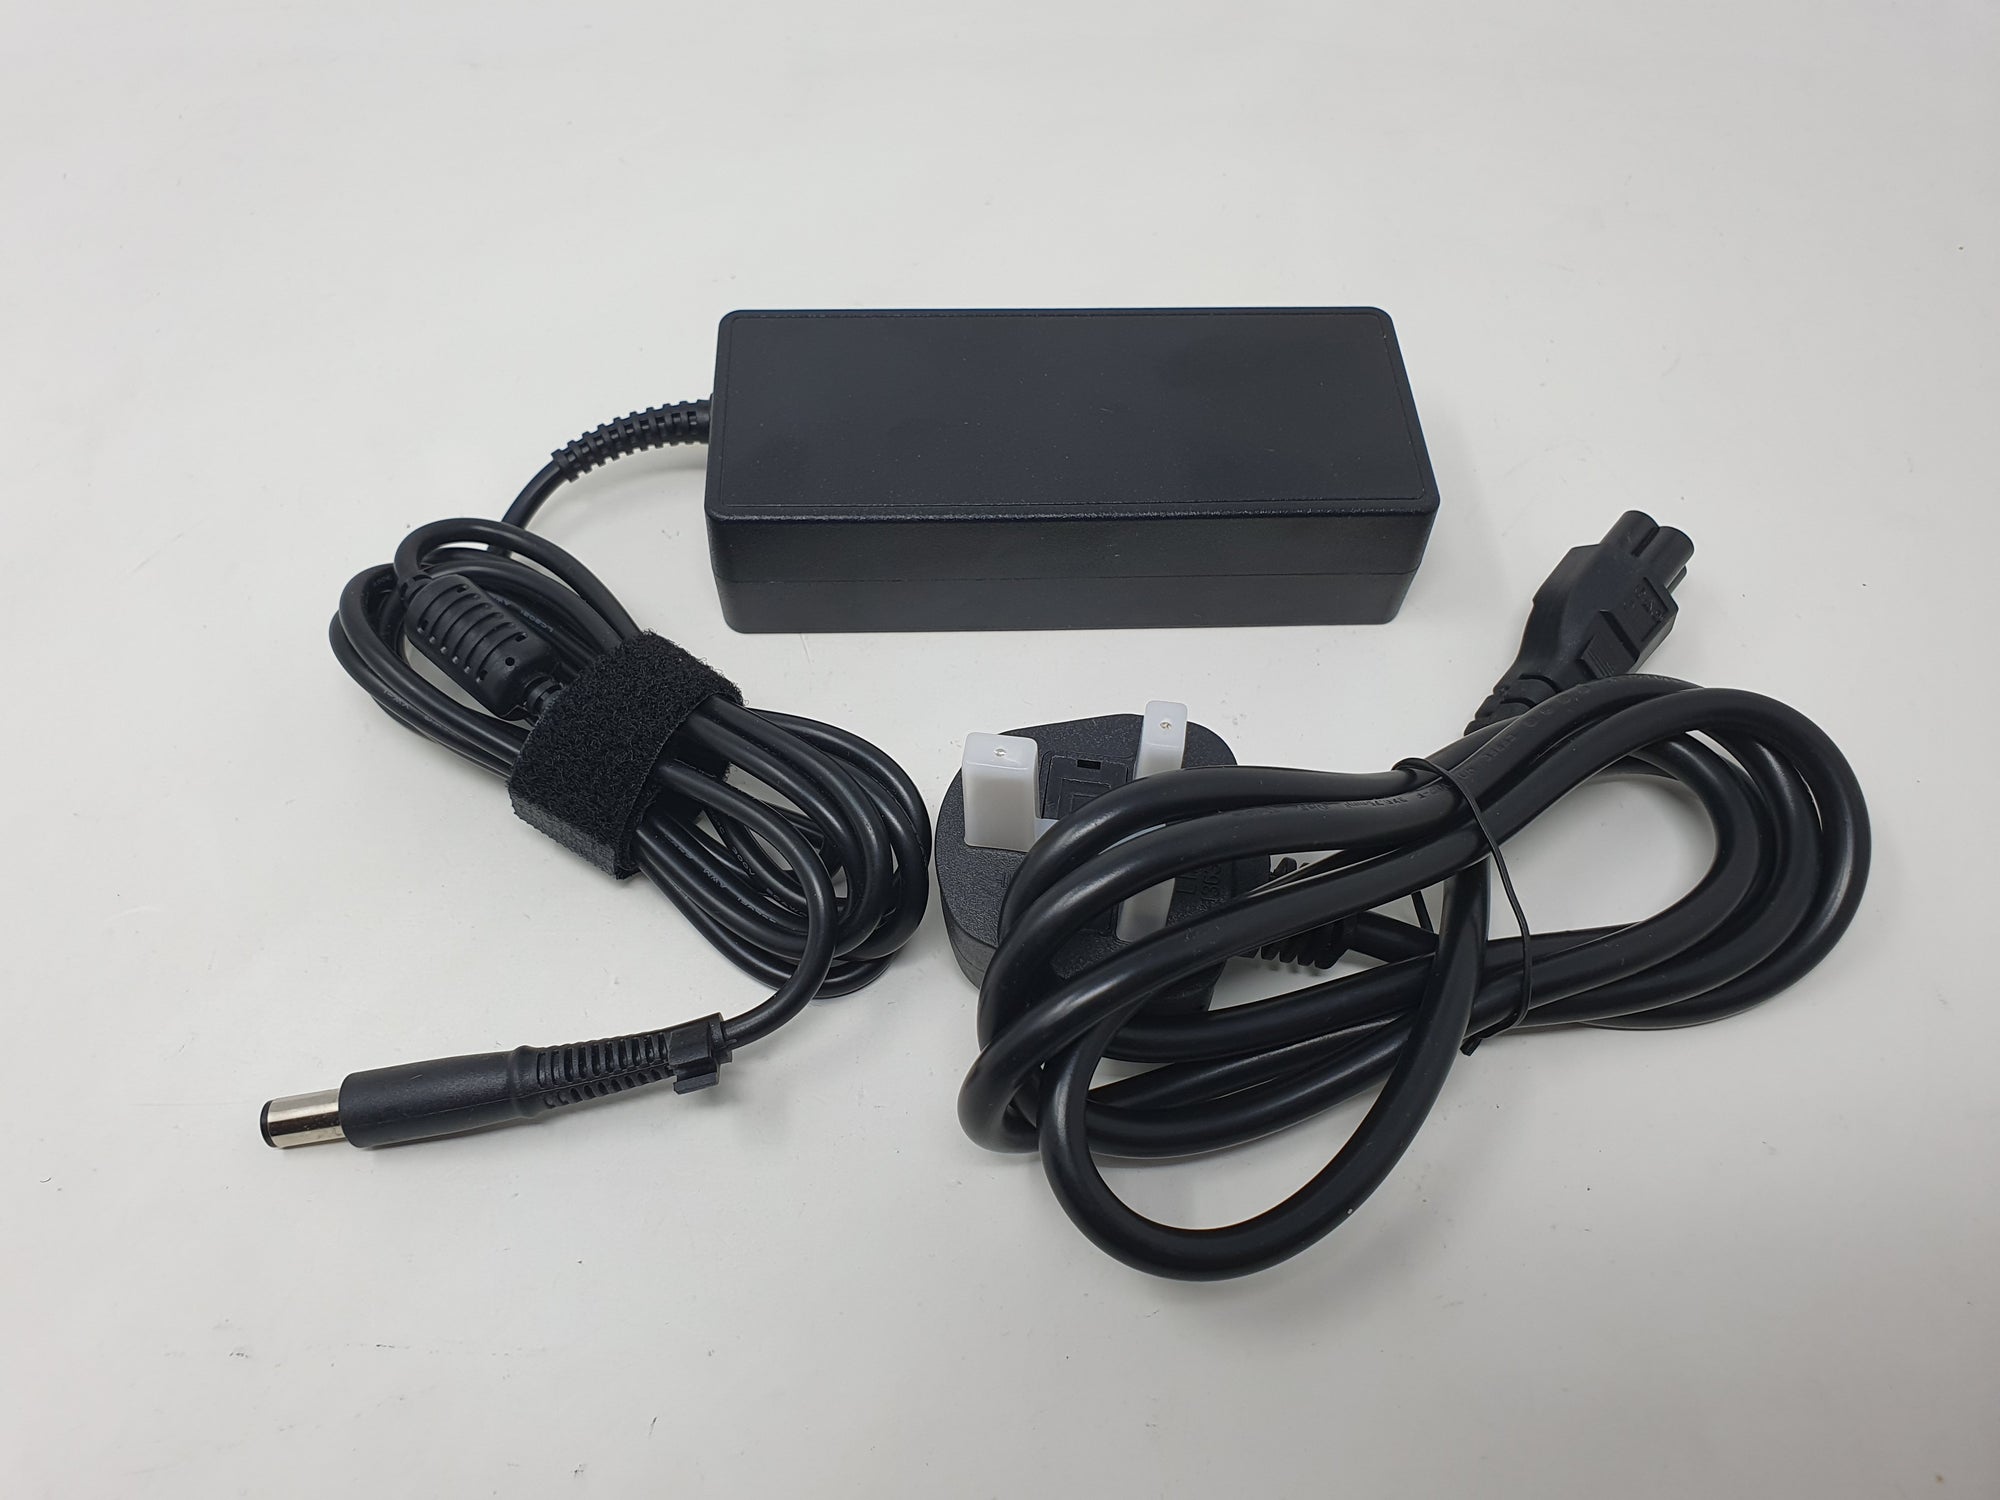 HP Laptop Charger Power Adaptor 19v 4.7a 18.5v 3.5a